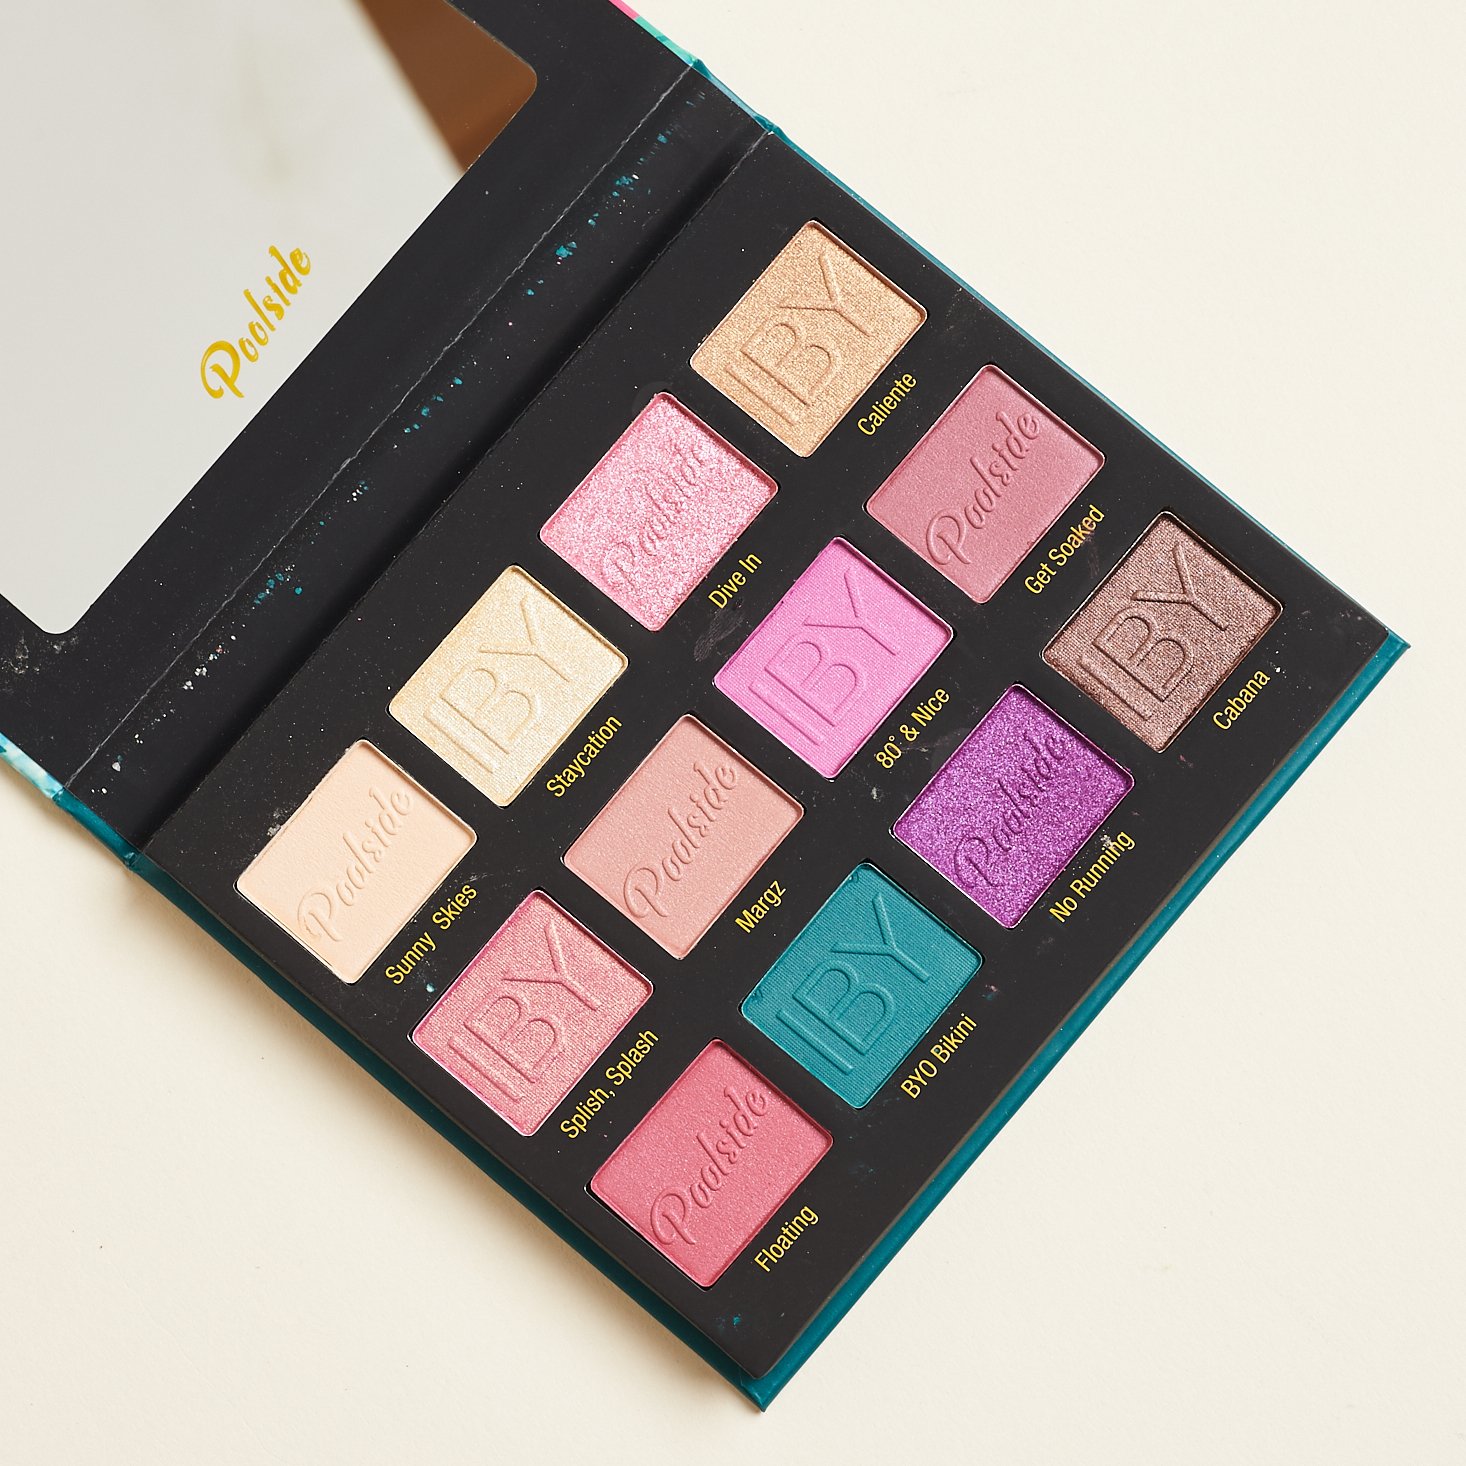 inside of the eyeshadow palette showing 12 shades ranging from ivory, to pink and purple, and teal